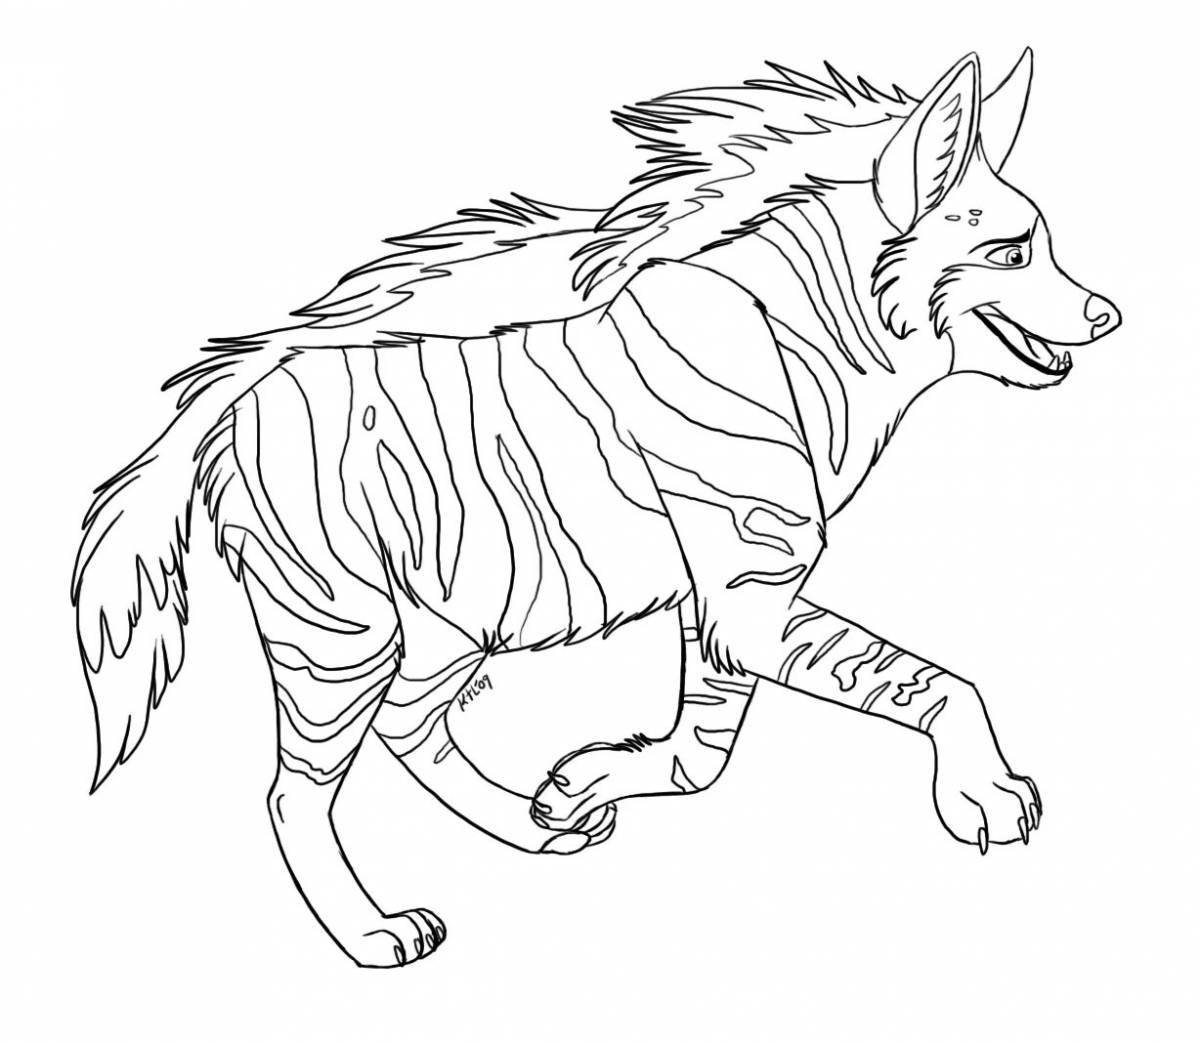 Playful hyena coloring page for kids